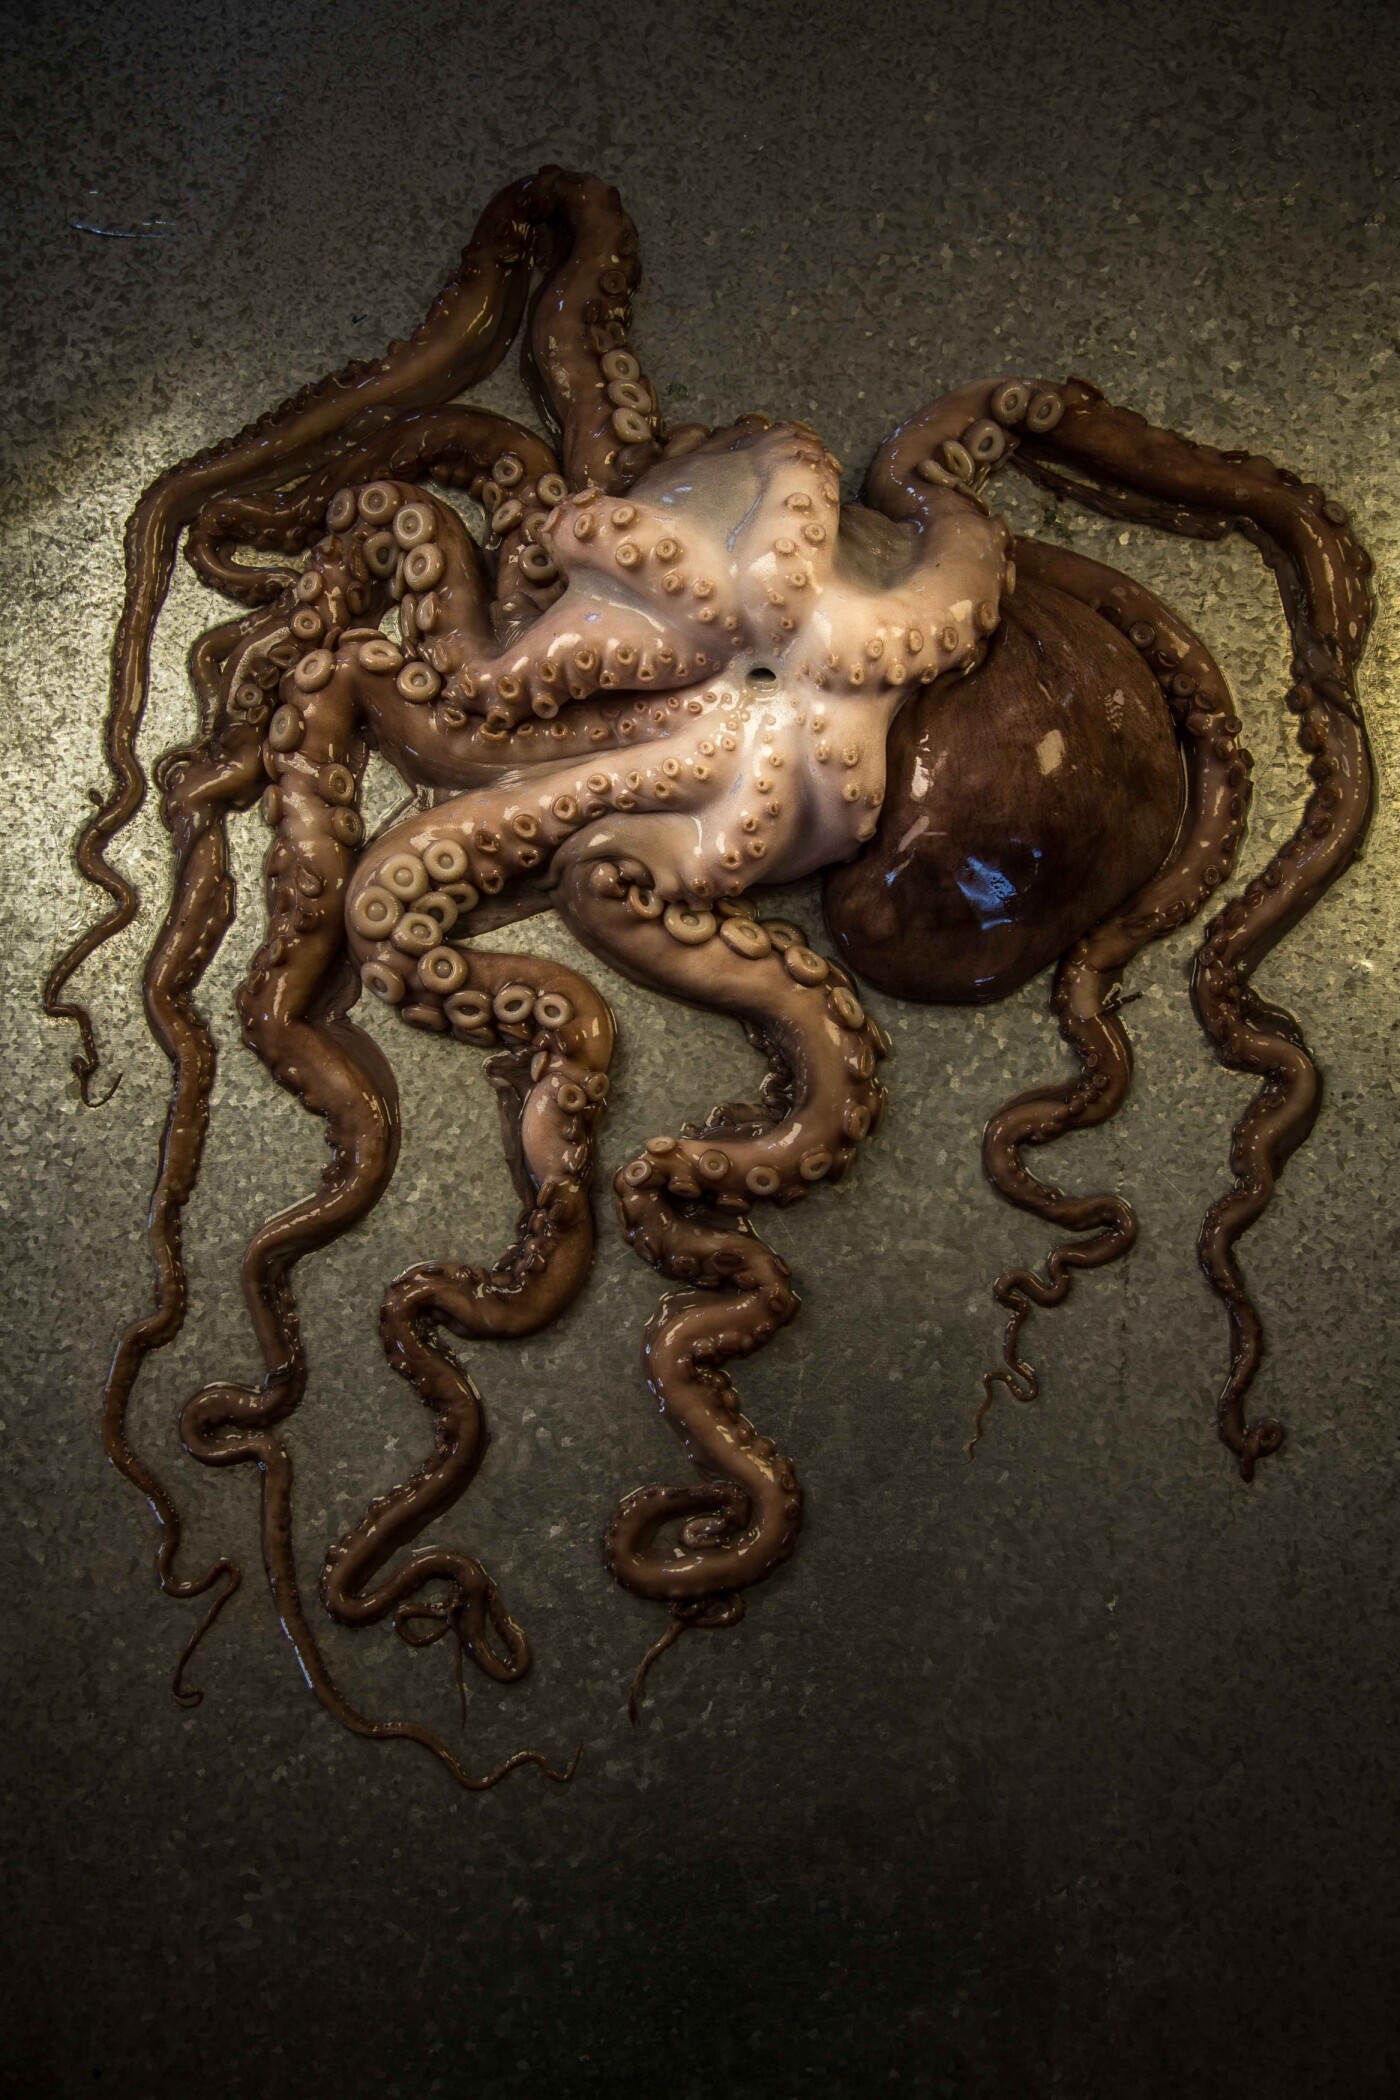 As a cinematographer and photographer who shoots for a variety of clients, the inspiration for this shoot was to do something that broke the mould of classic food photography a bit, as that is something that I am predominantly required to capture.  Something which explored the theatrical beauty and almost macabre persona of ingredients like octopus when it is isolated.  Seeing as though these images were for no client in particular, the aim was to forget the traditional boundaries and just play with our food.